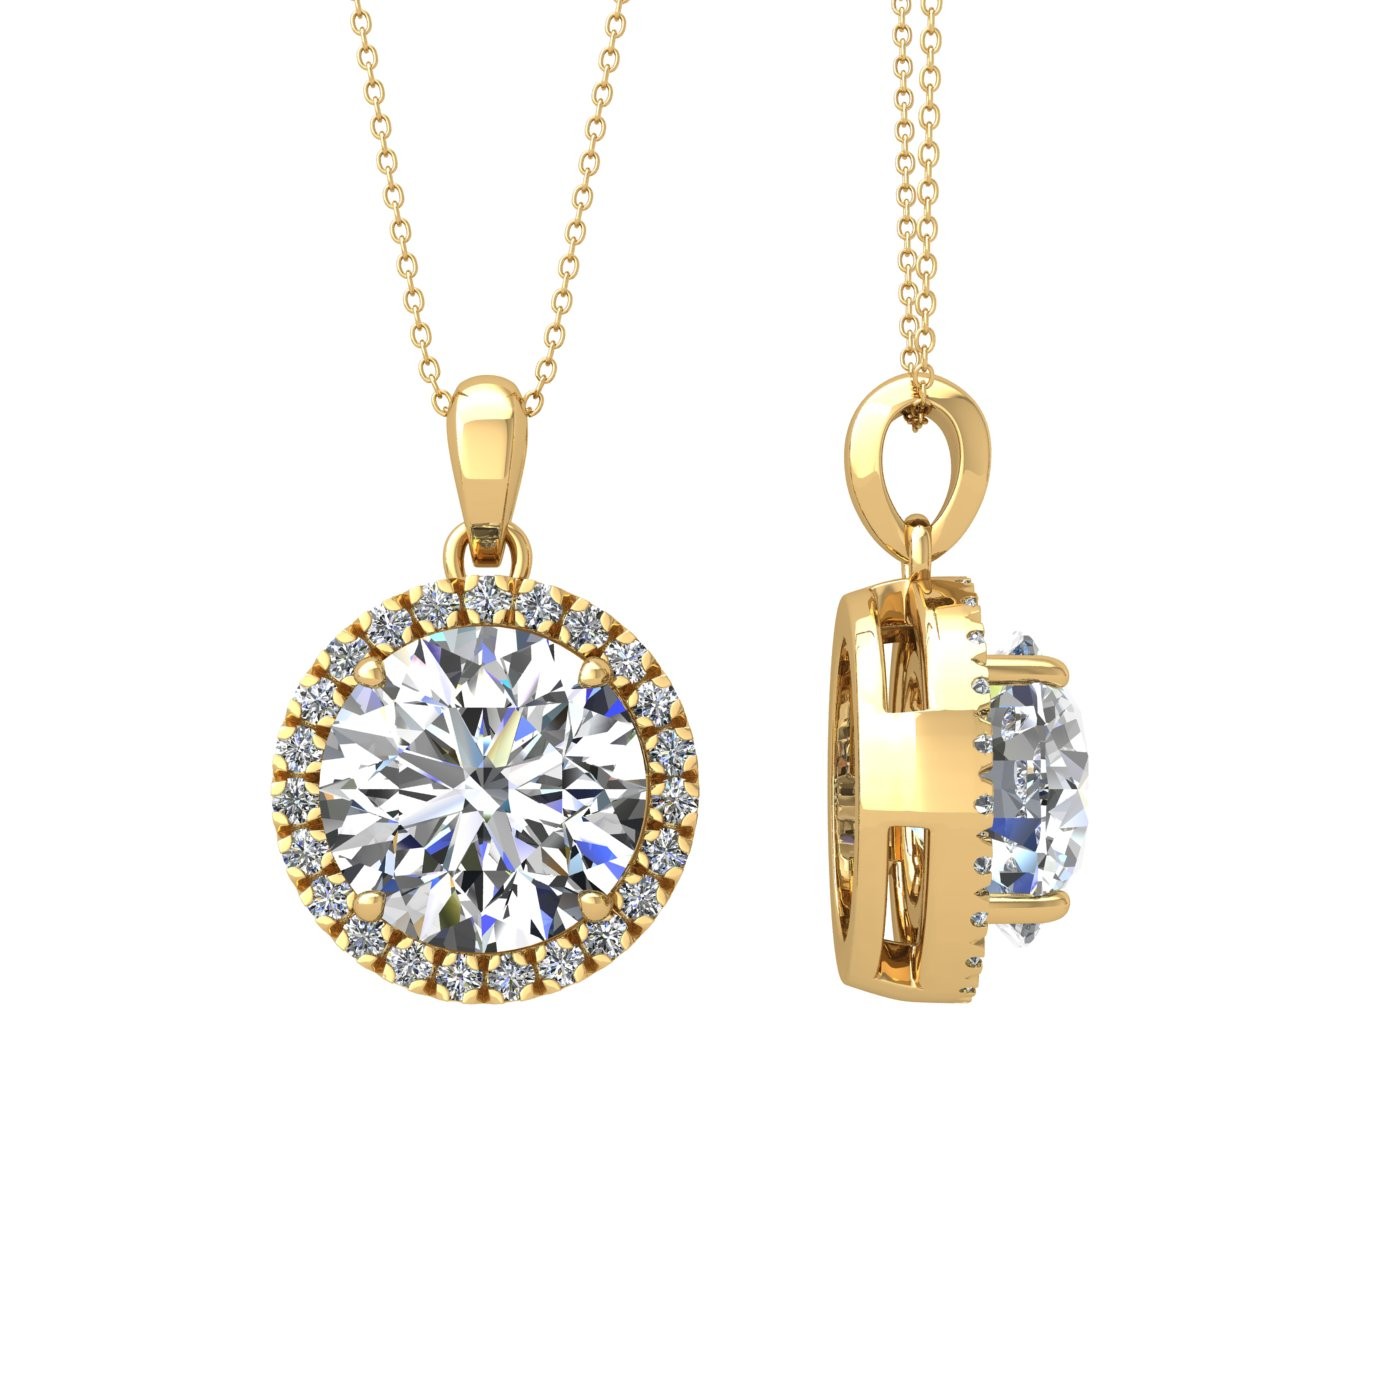 18k yellow gold  0,7 ct 4 prong round shape diamond pendant with diamond pavÉ set halo including chain seperate from the pendant Photos & images